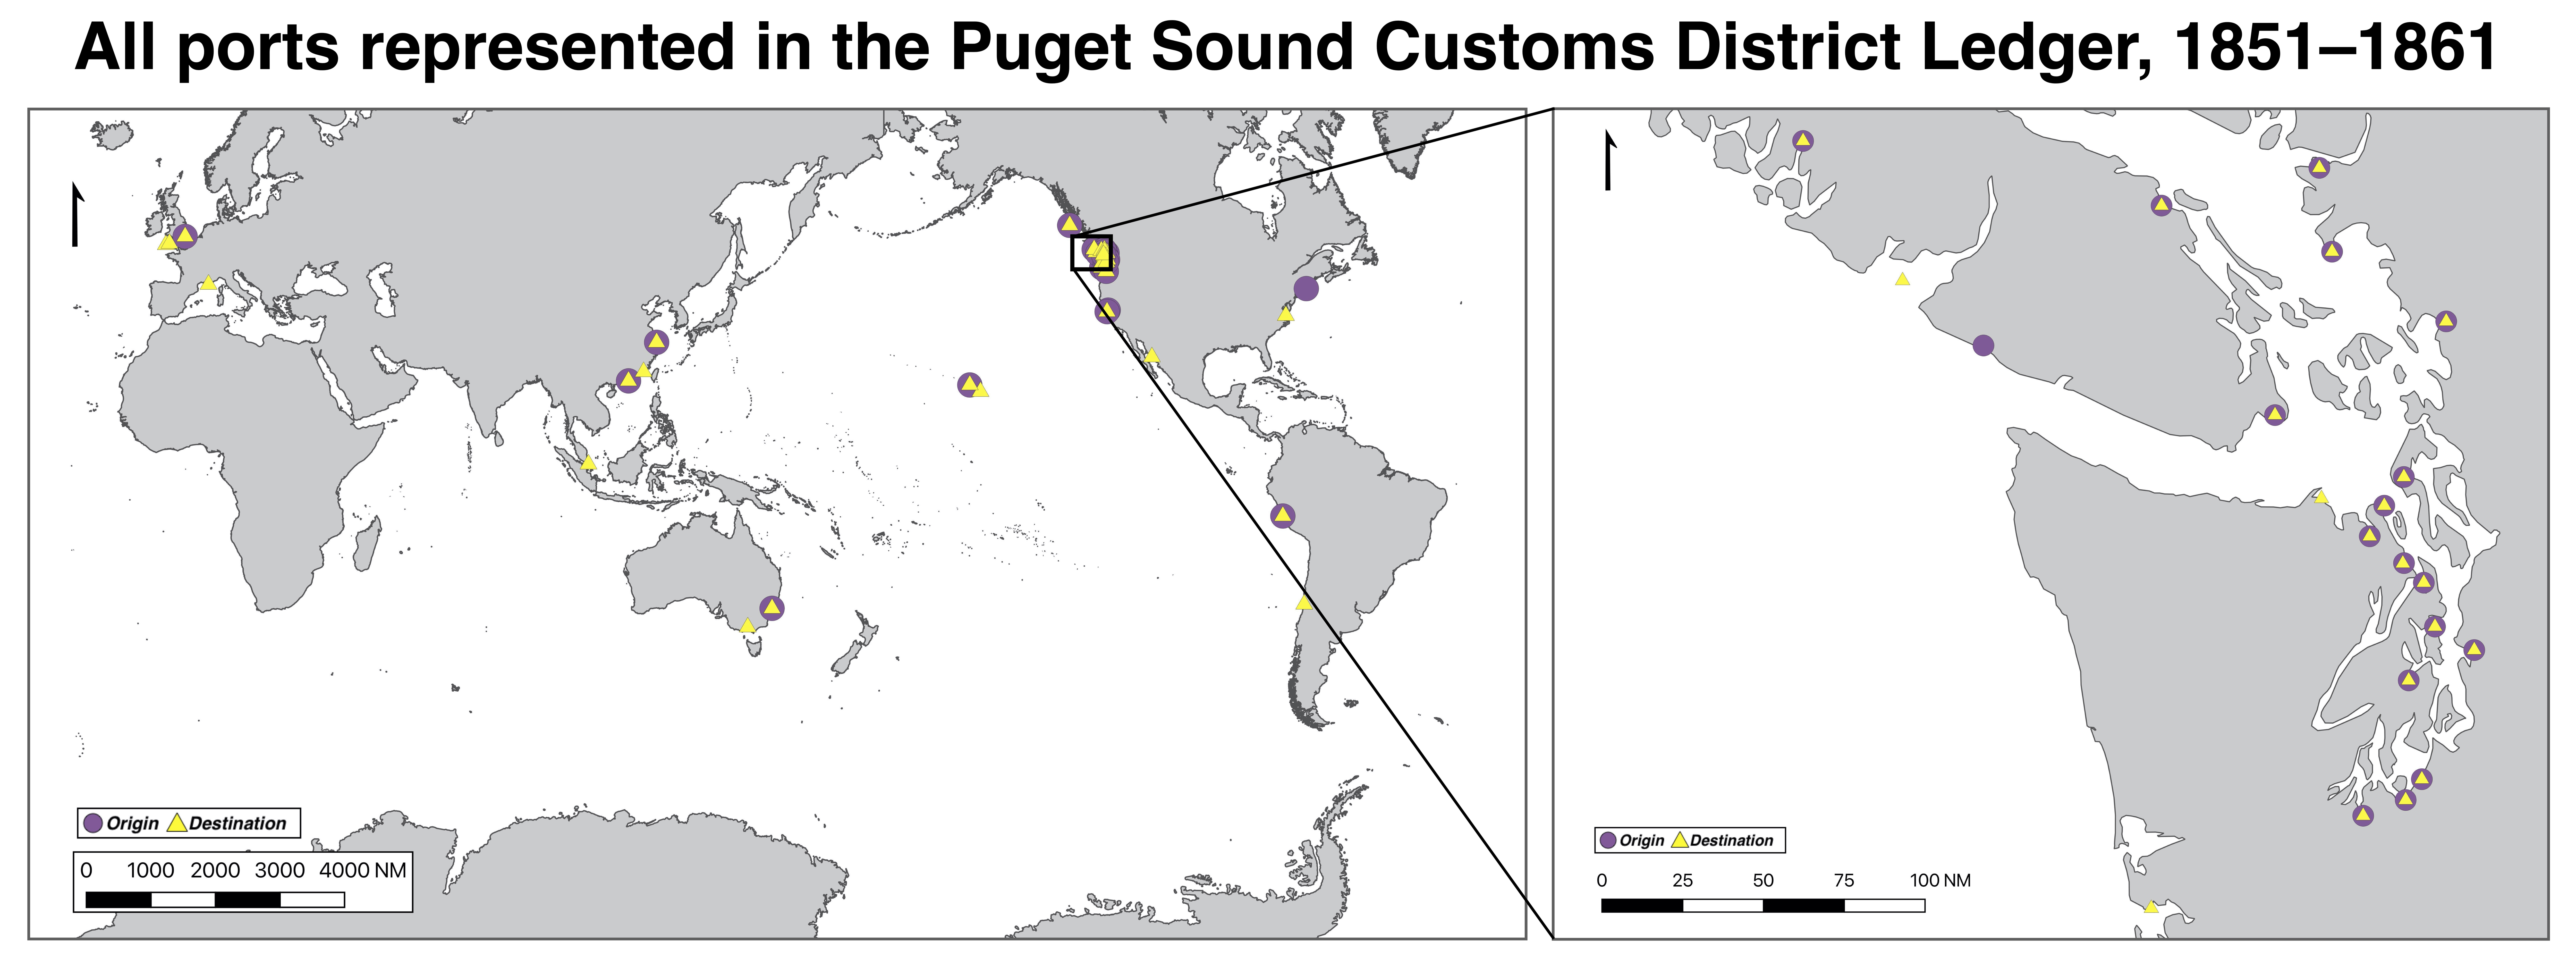 The left images shows a world map. The right images shows a map of Puget Sound. Purple circles indicate points of origin. Yellow triangles indicate destinations.